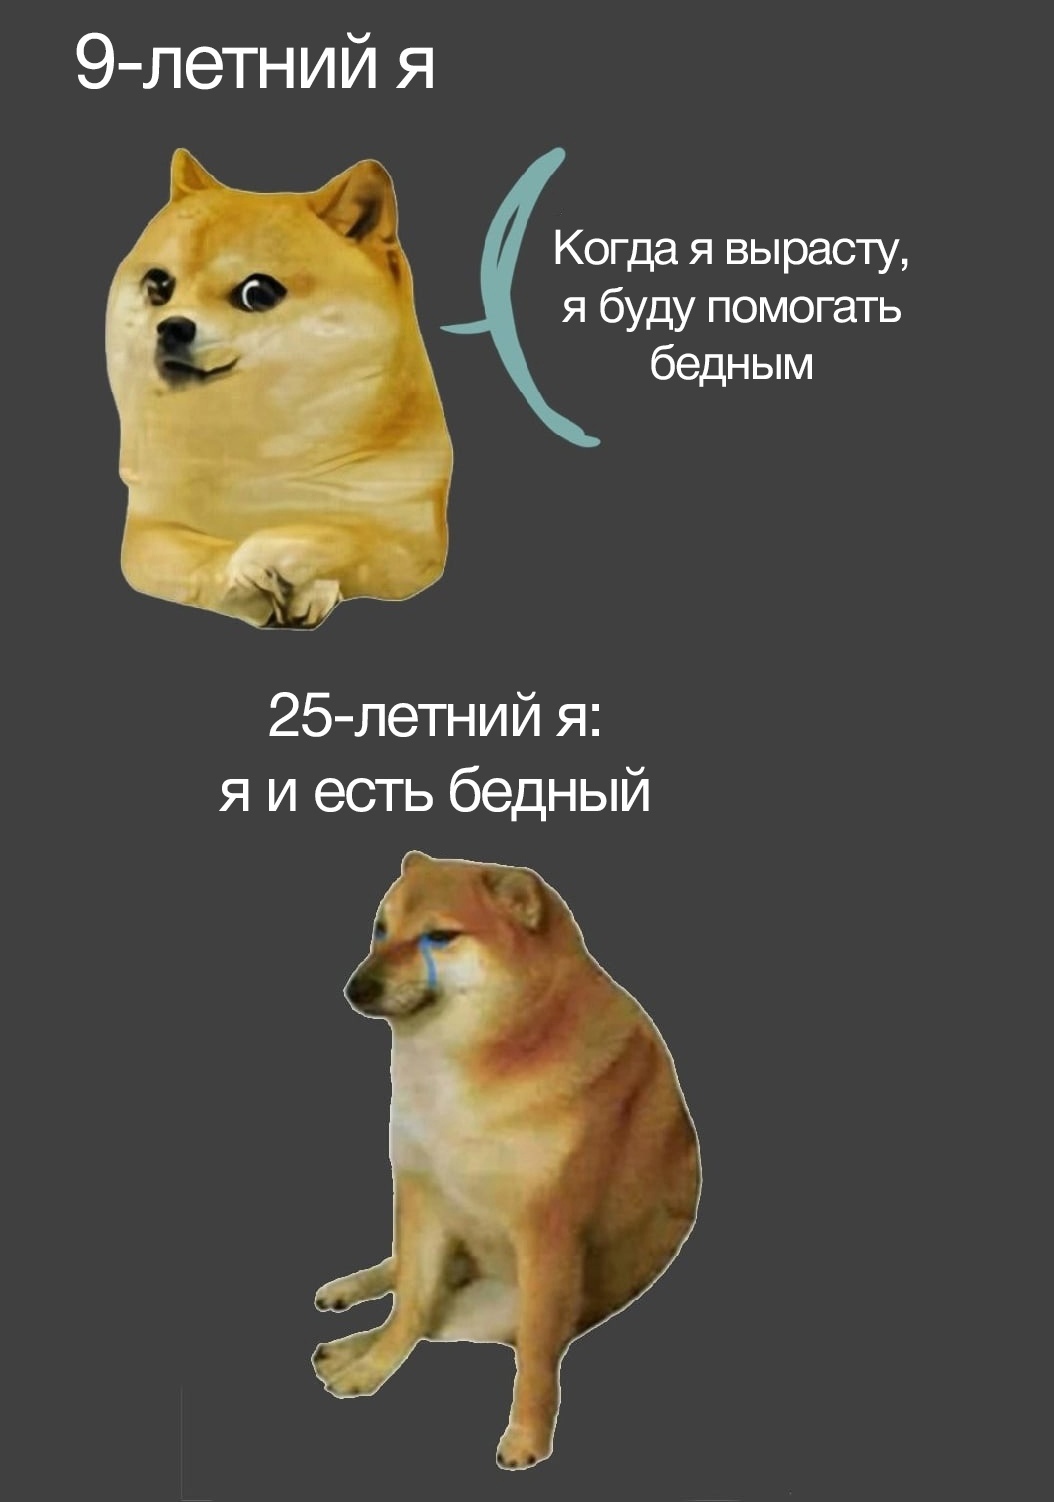 mission Impossible - Picture with text, Memes, Doge, Poverty, Dream